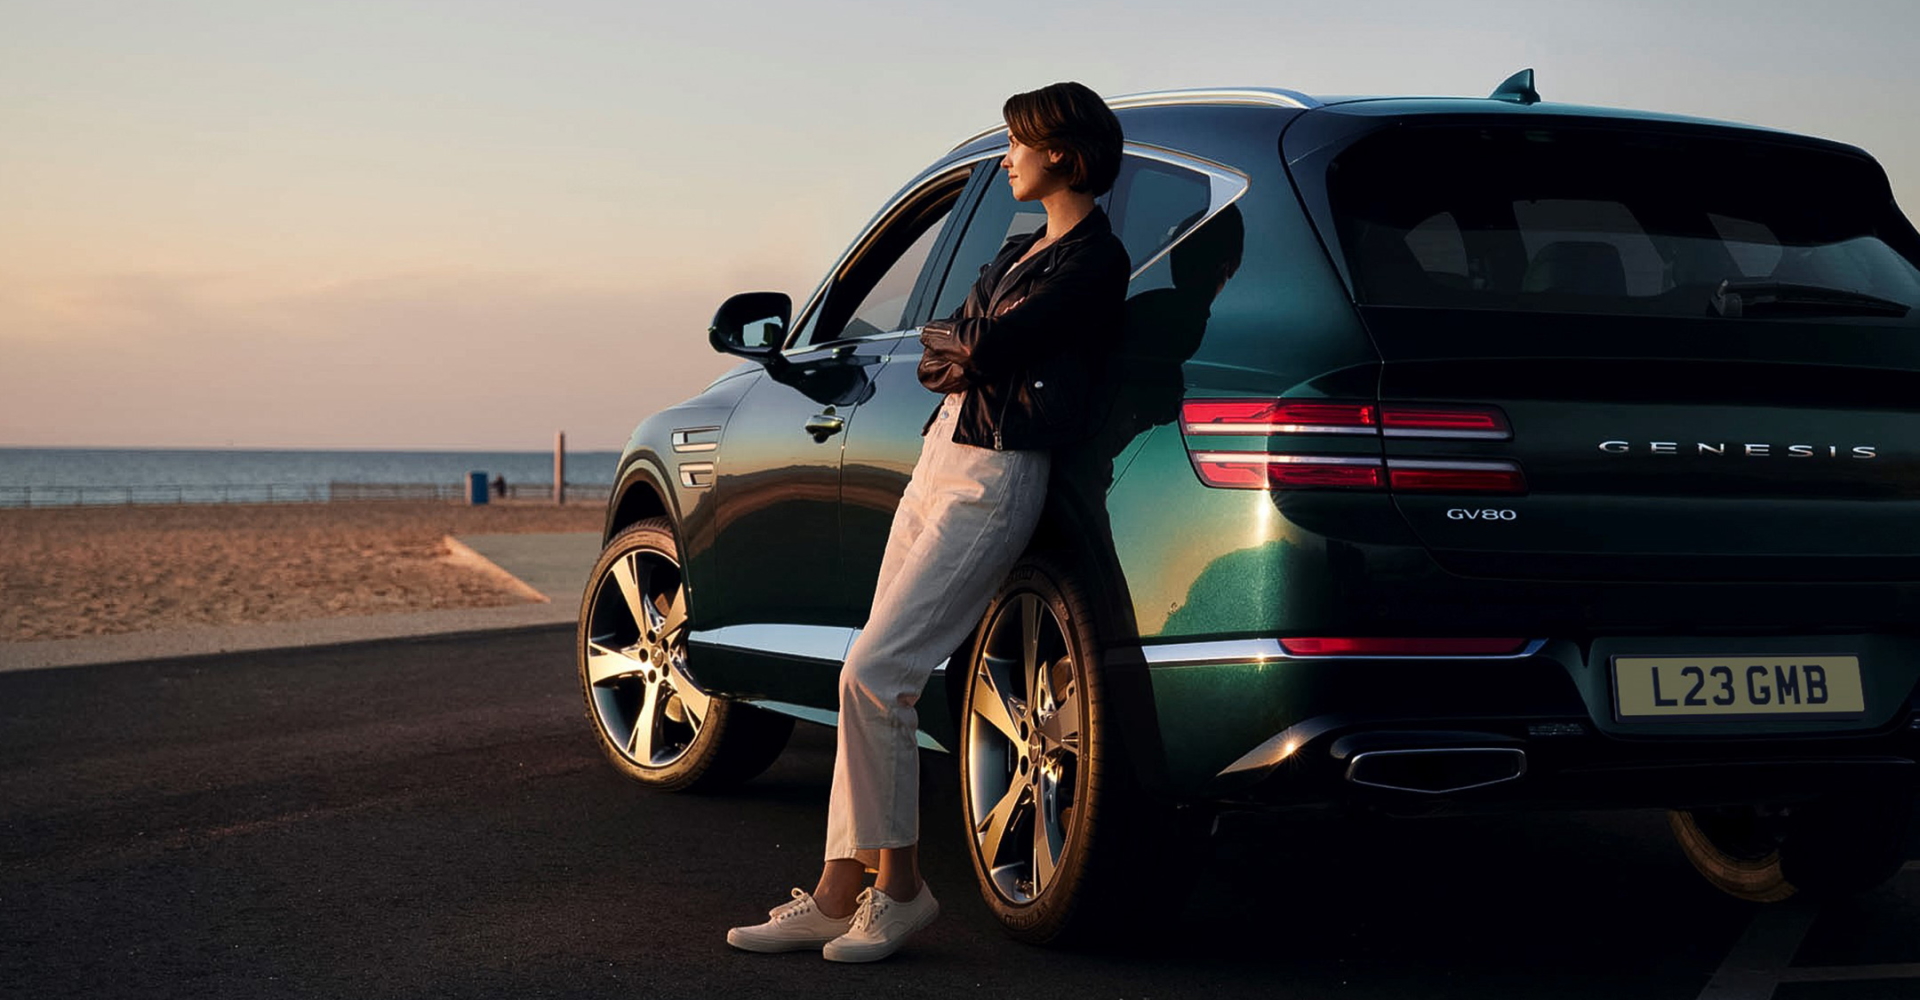 A woman contentedly leans against her Genesis SUV parked by a beach, she looks out across the sea as the sun begins to set